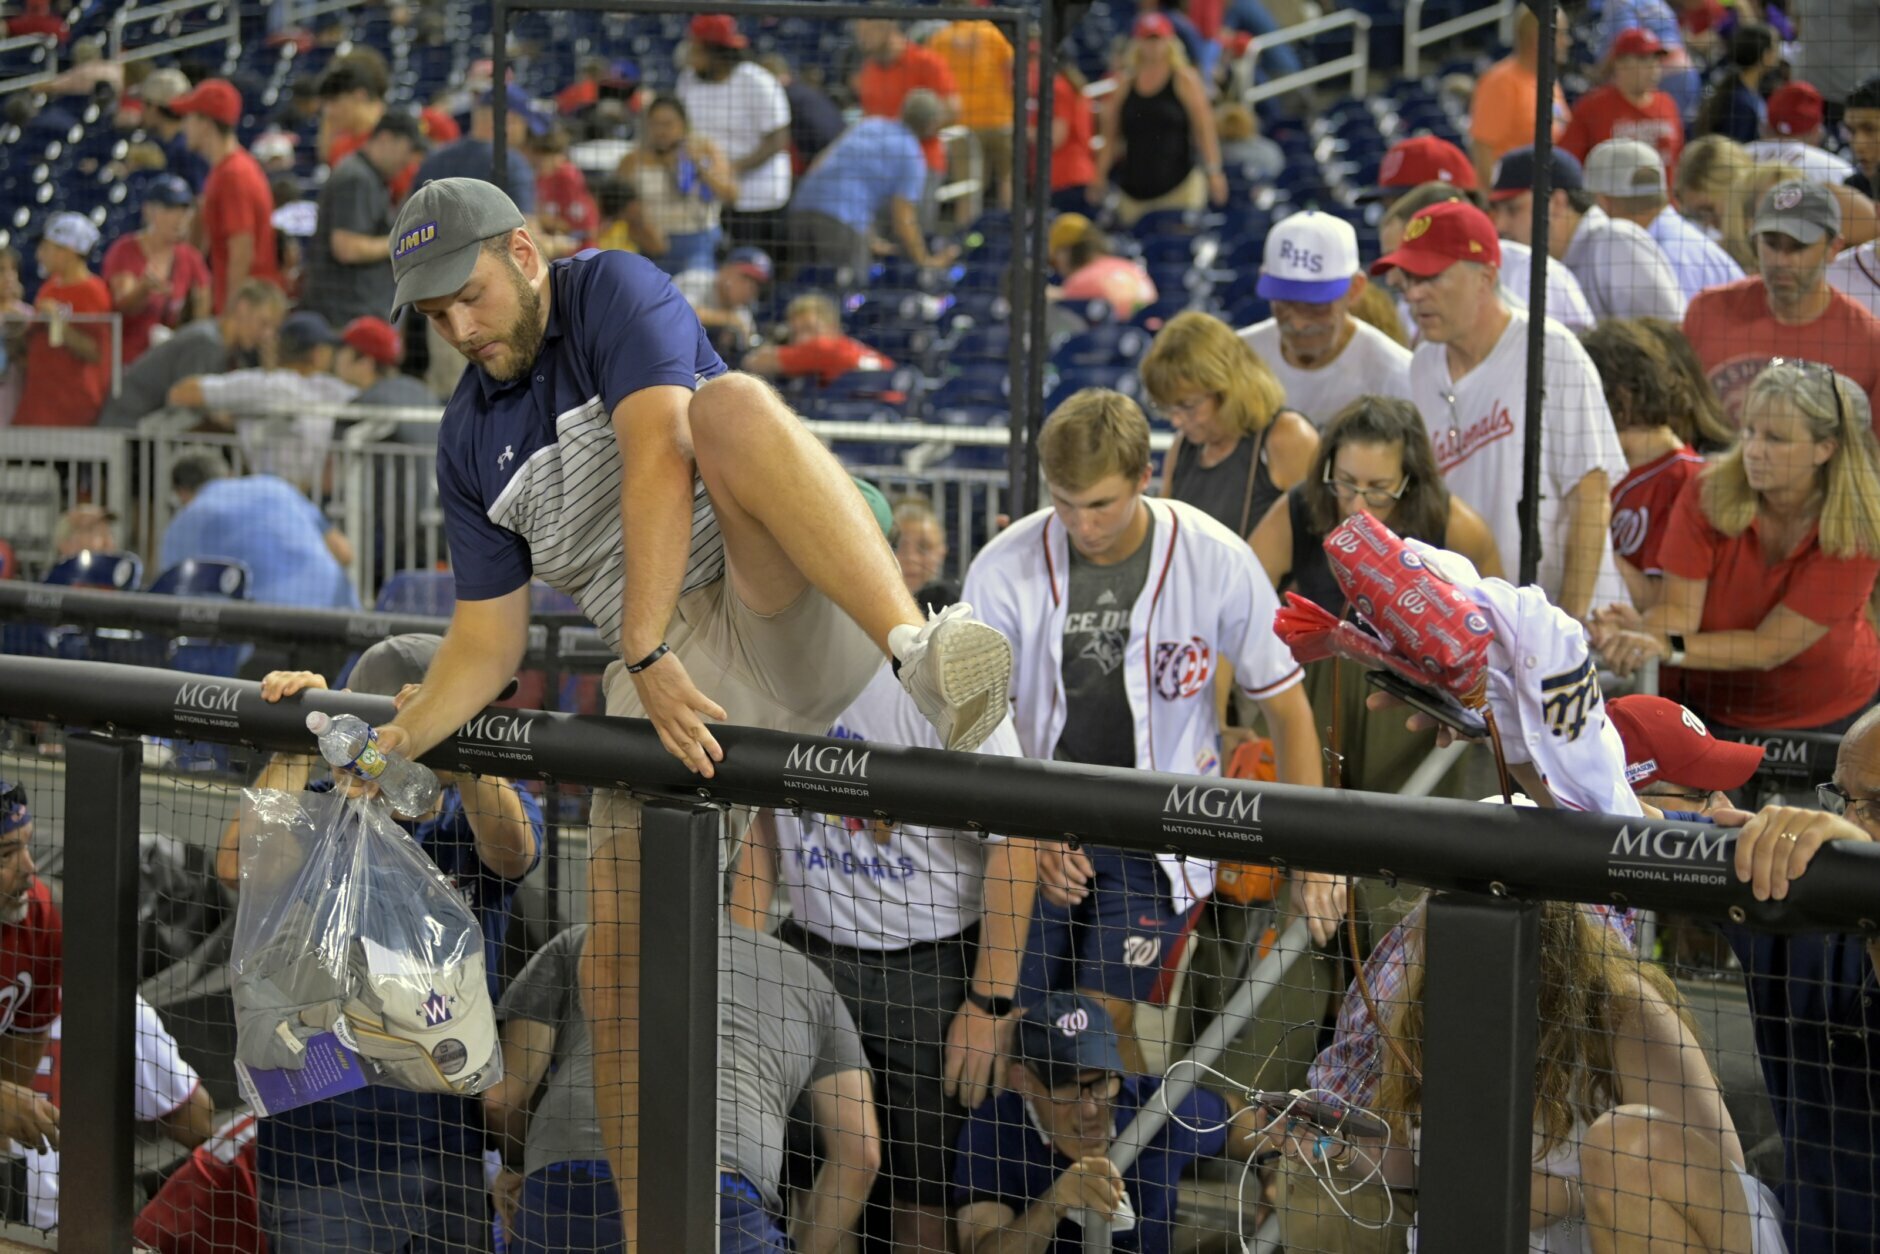 Fans pour out onto the field after hearing gunfire from outside the stadium, during a baseball game between the San Diego Padres and the Washington Nationals at Nationals Park in Washington on Saturday, July 17, 2021. (John McDonnell/The Washington Post via AP)